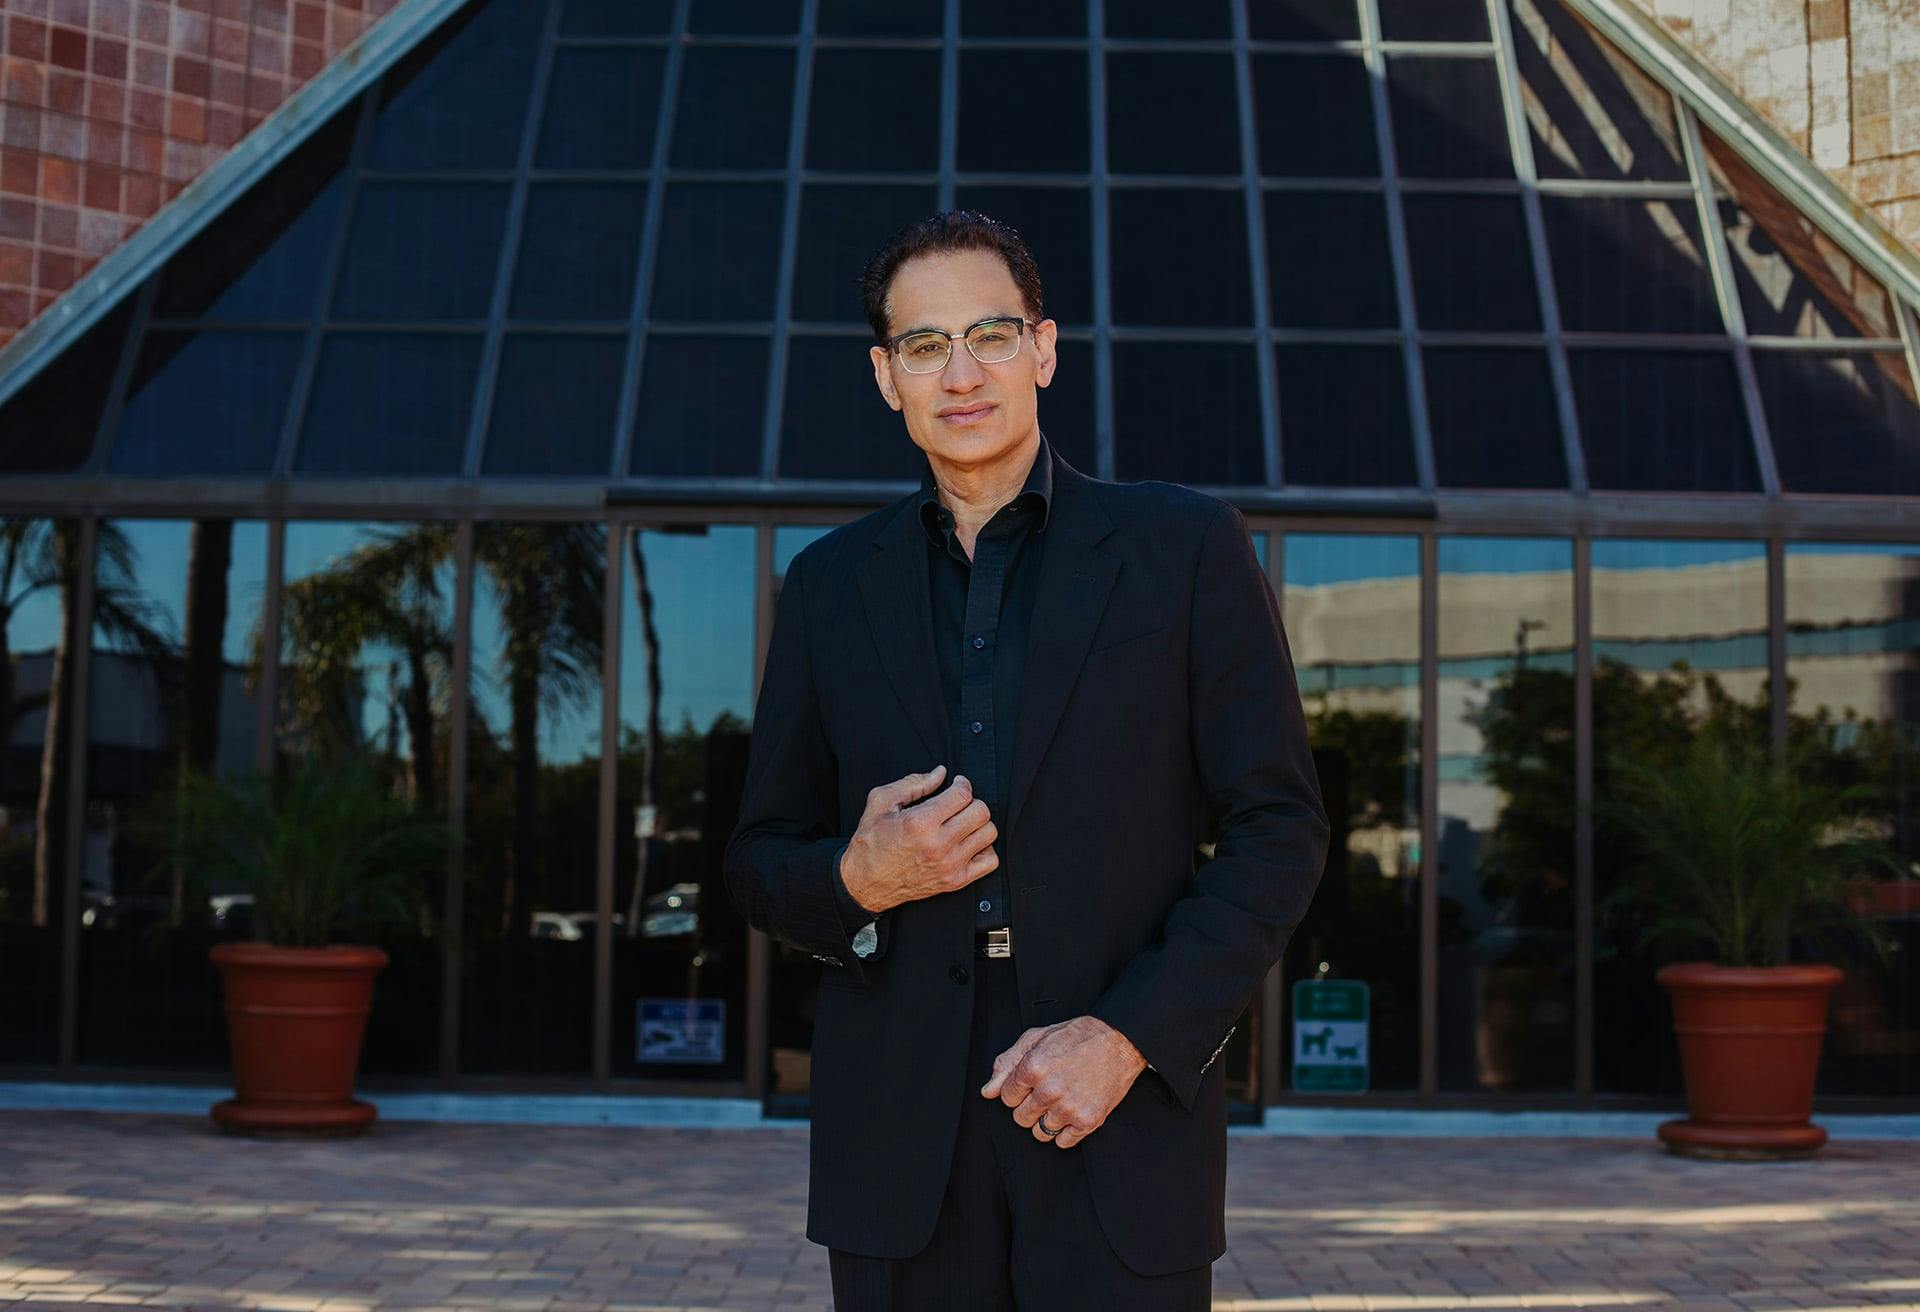 Dr. Moradi standing in front of a building